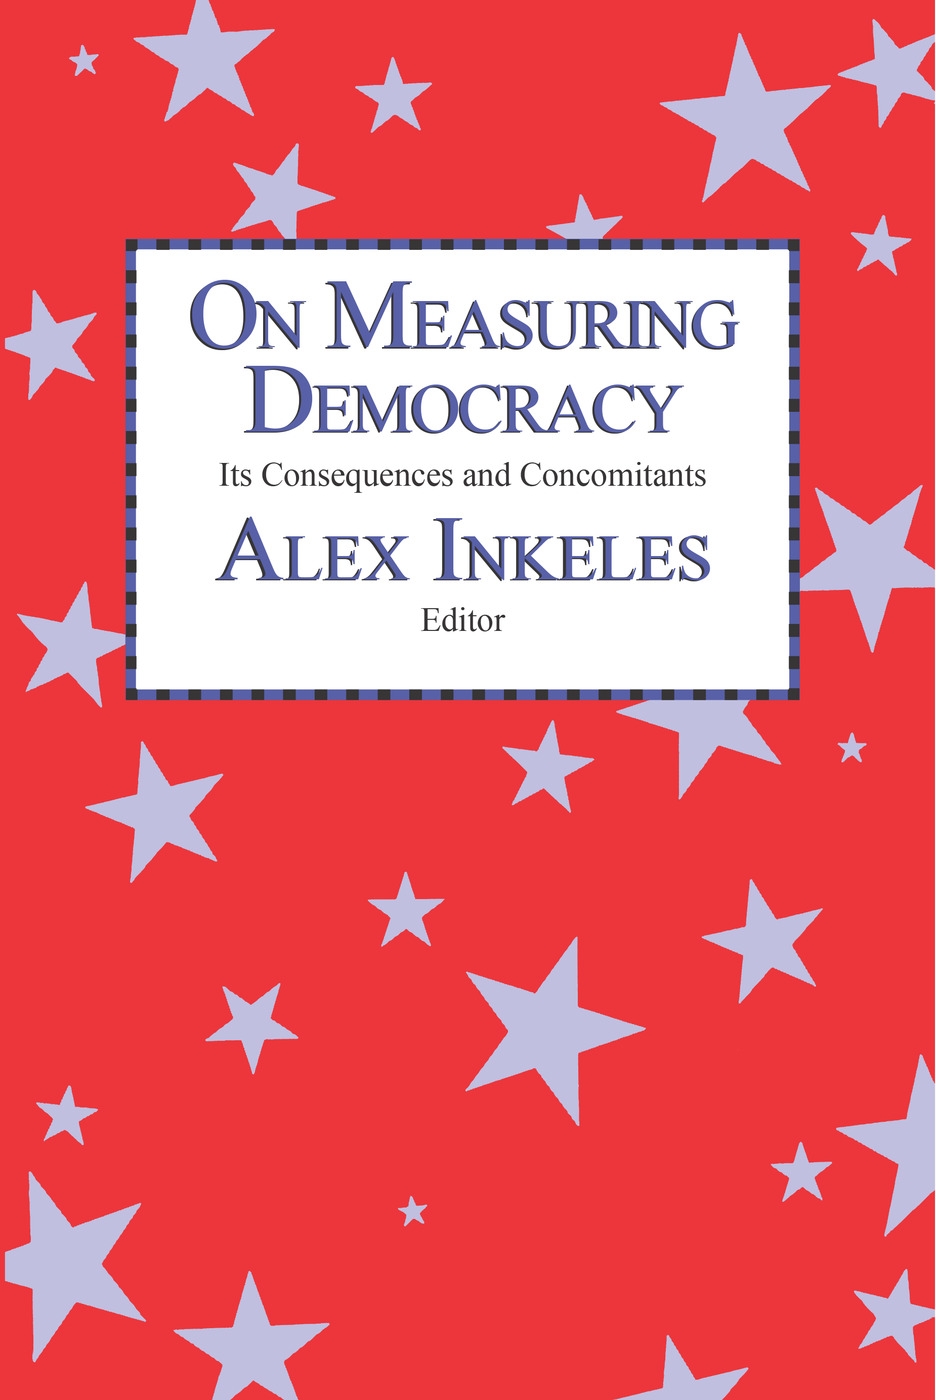 On Measuring Democracy: Its Consequences and Concomitants